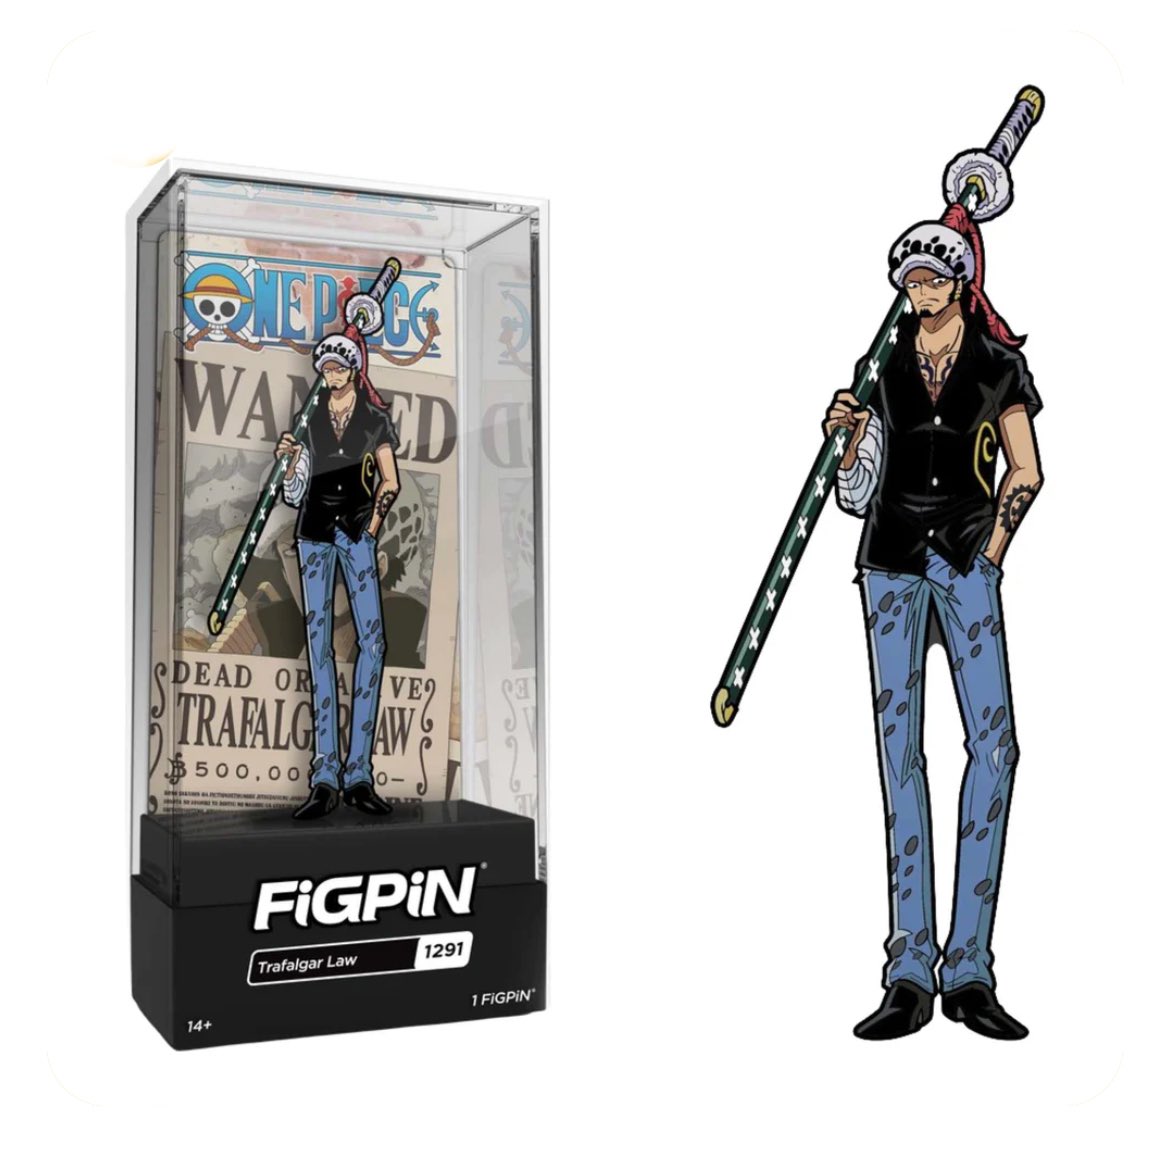 One piece Trafalgar Law FigPin NYCC Exclusive Available at @plasticempire

⭐️ 35.00$
⭐️ Retail Price was 25$
⭐️ Hobbydb Price: 37$
plasticempire.com/products/figpi…

#onepiece #onepieceanime  #onepiecefan #onepiece